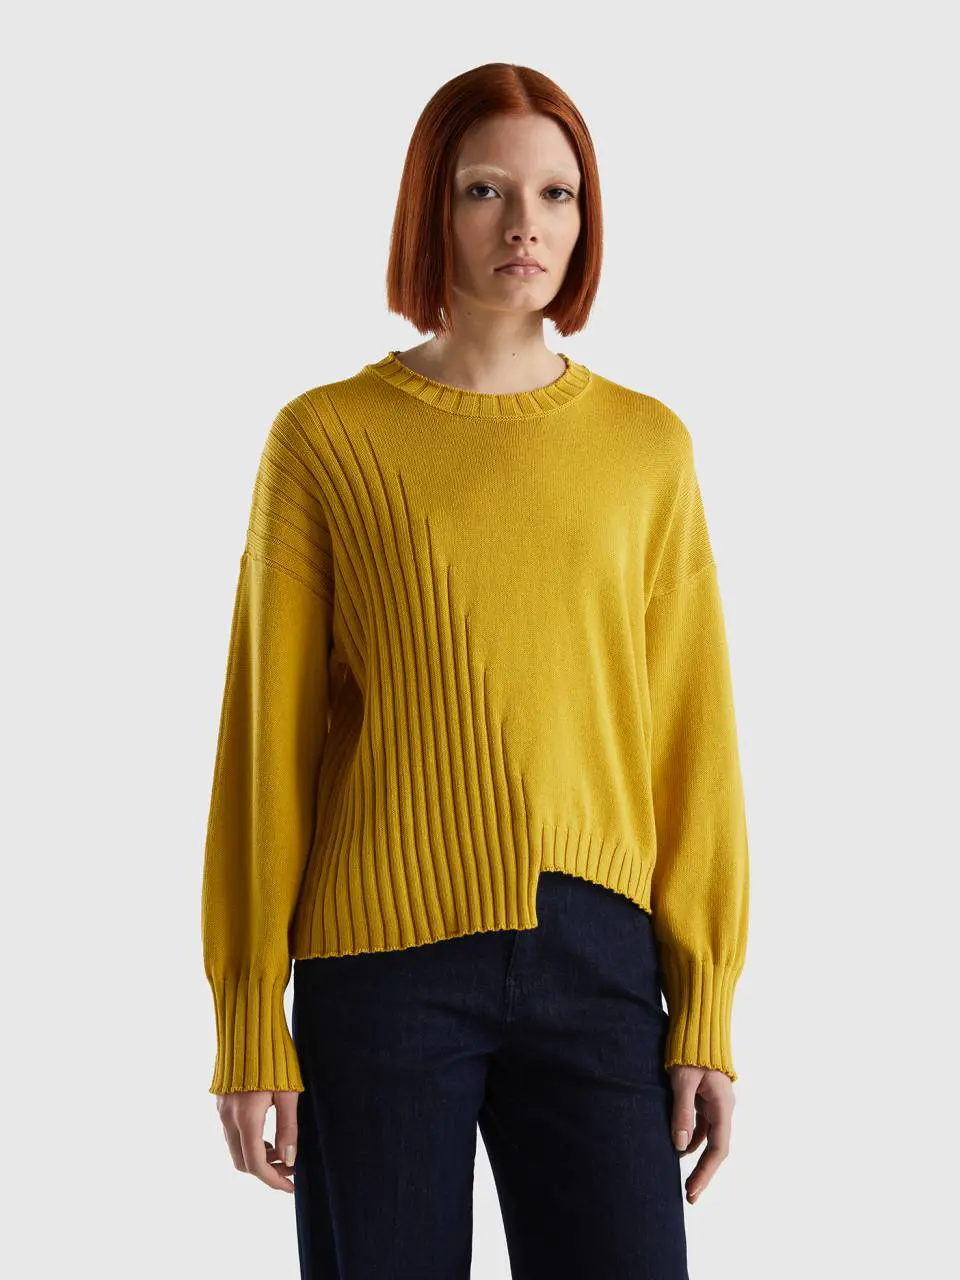 Benetton sweater with uneven bottom. 1